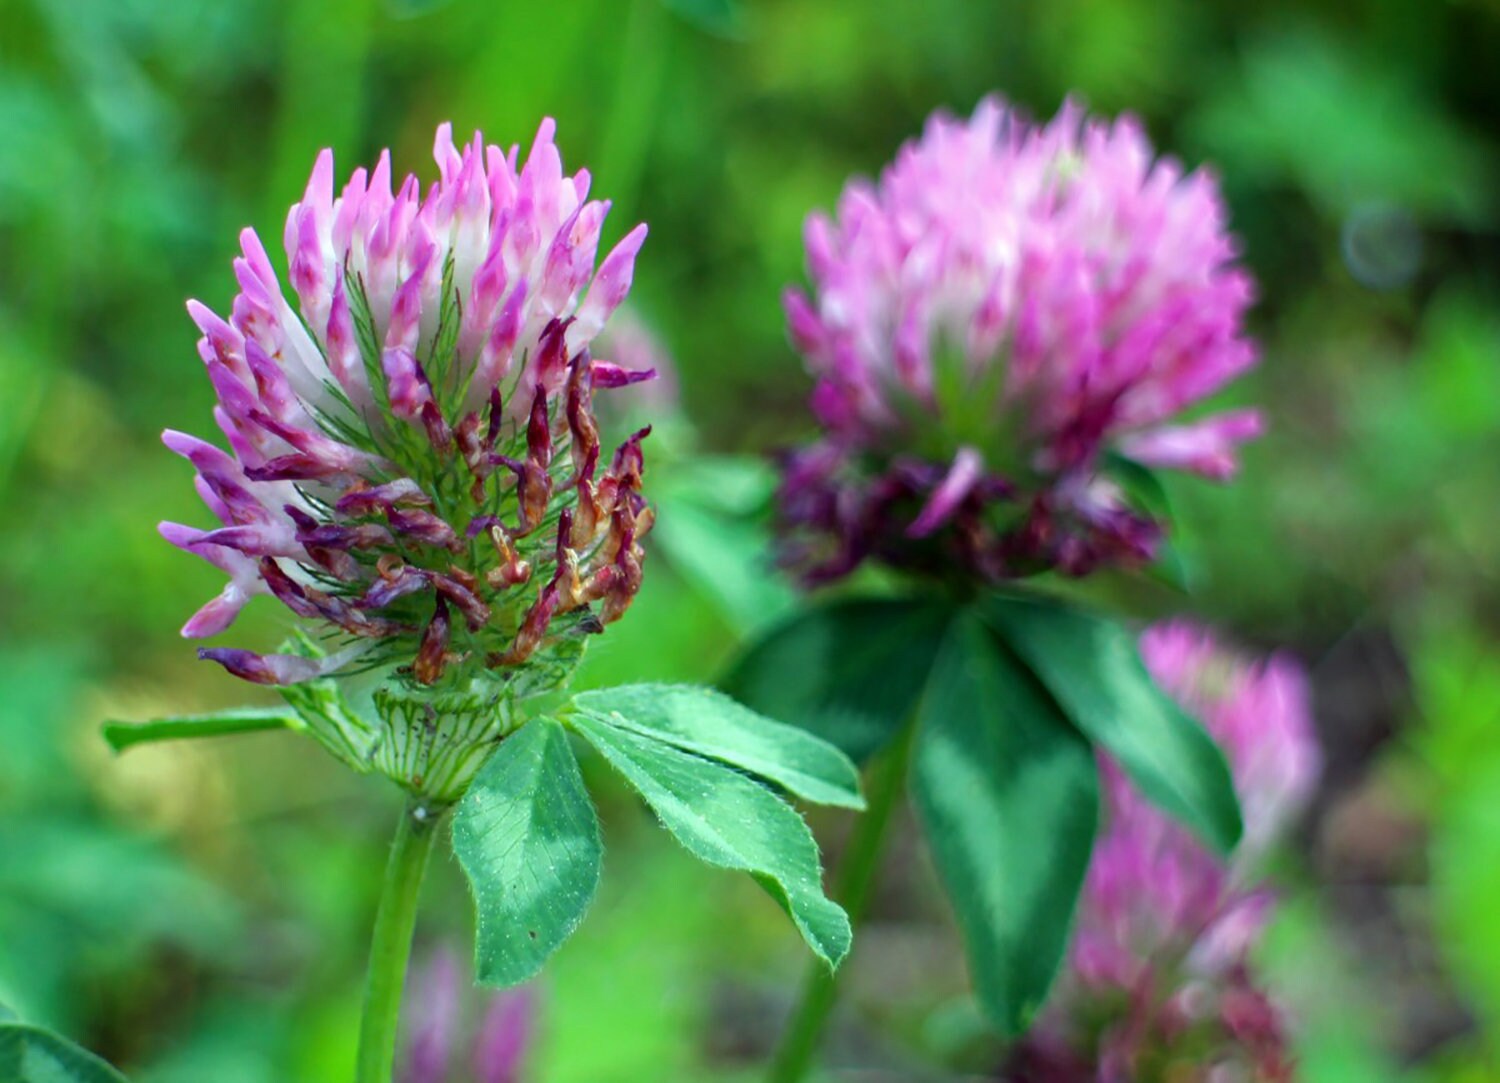 Vibrant red clover blossoms in full bloom, a stunning sight at our Low Water Colorado Mountain Herb Farm